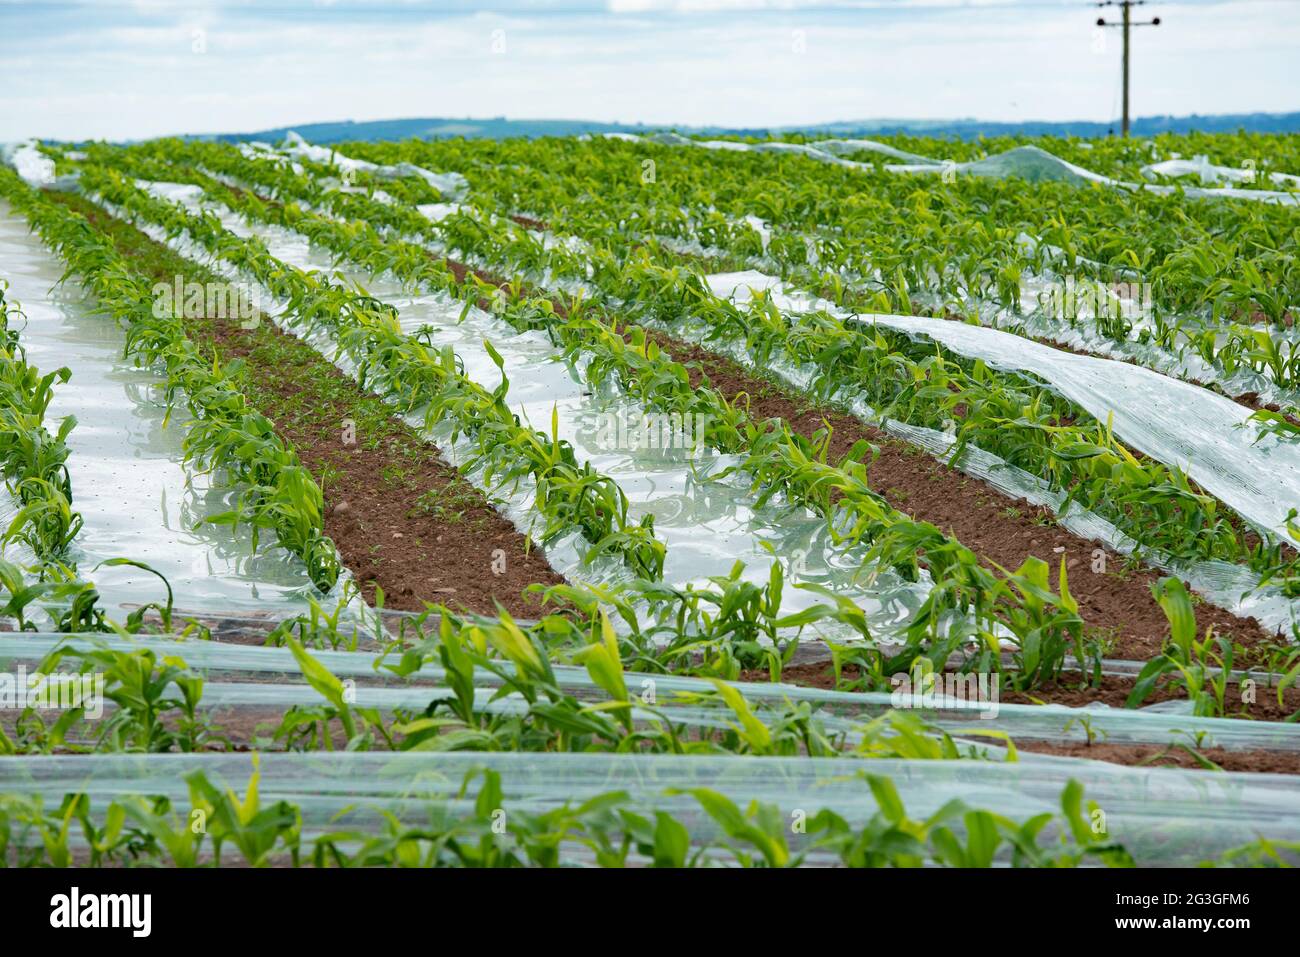 A crop of feed maize growing under biodegradable plastic, Lockerbie, Dumfries and Galloway, south-western Scotland, UK. Stock Photo